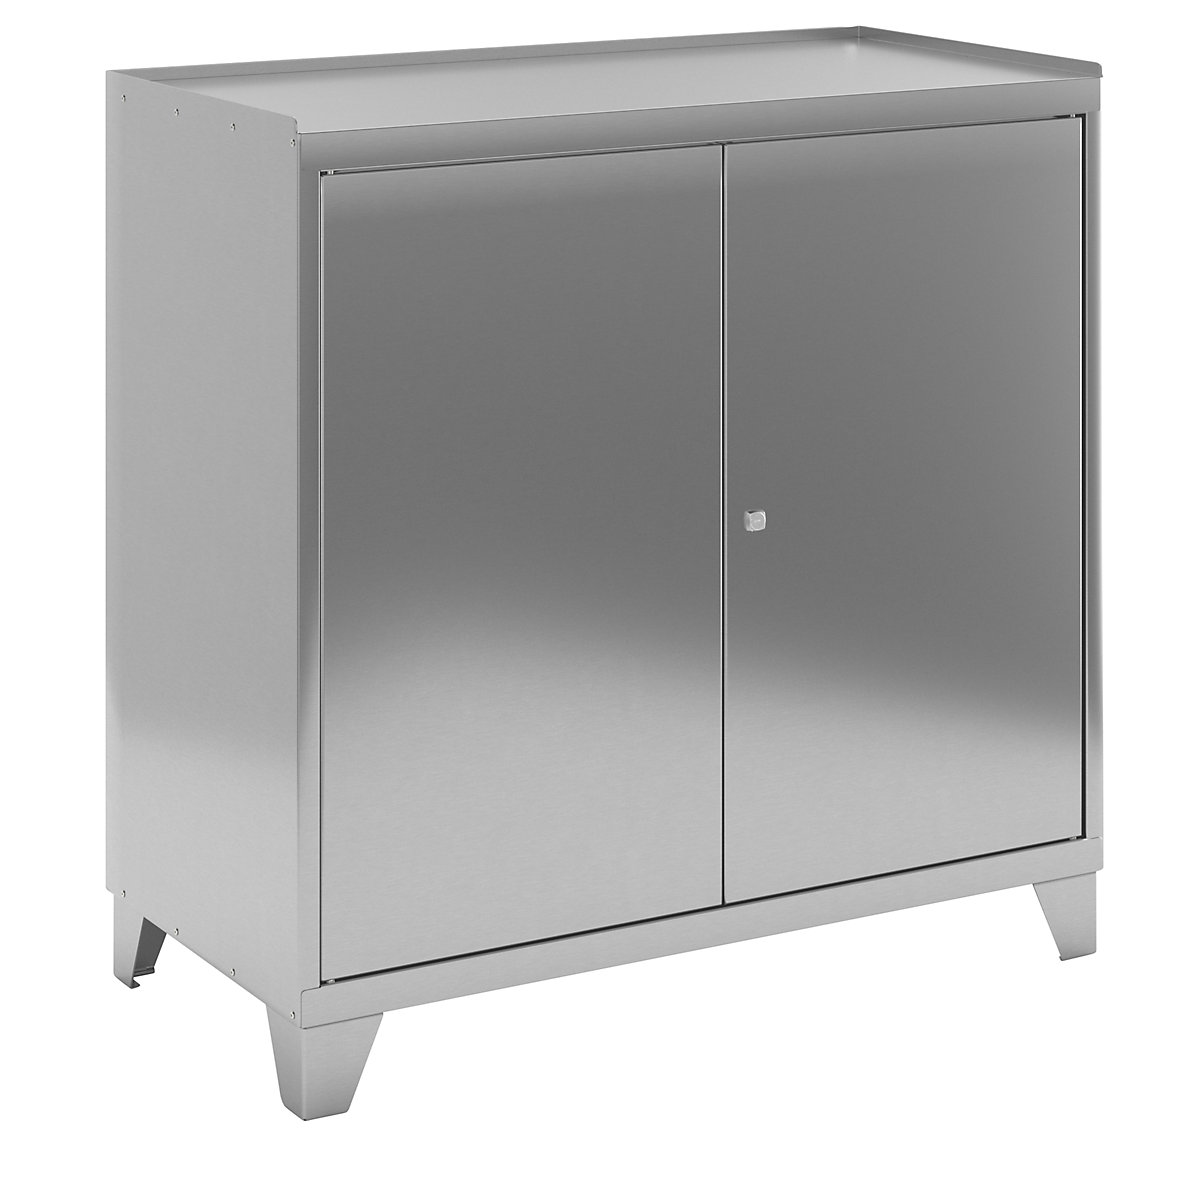 Stainless steel tool cupboard with stud feet